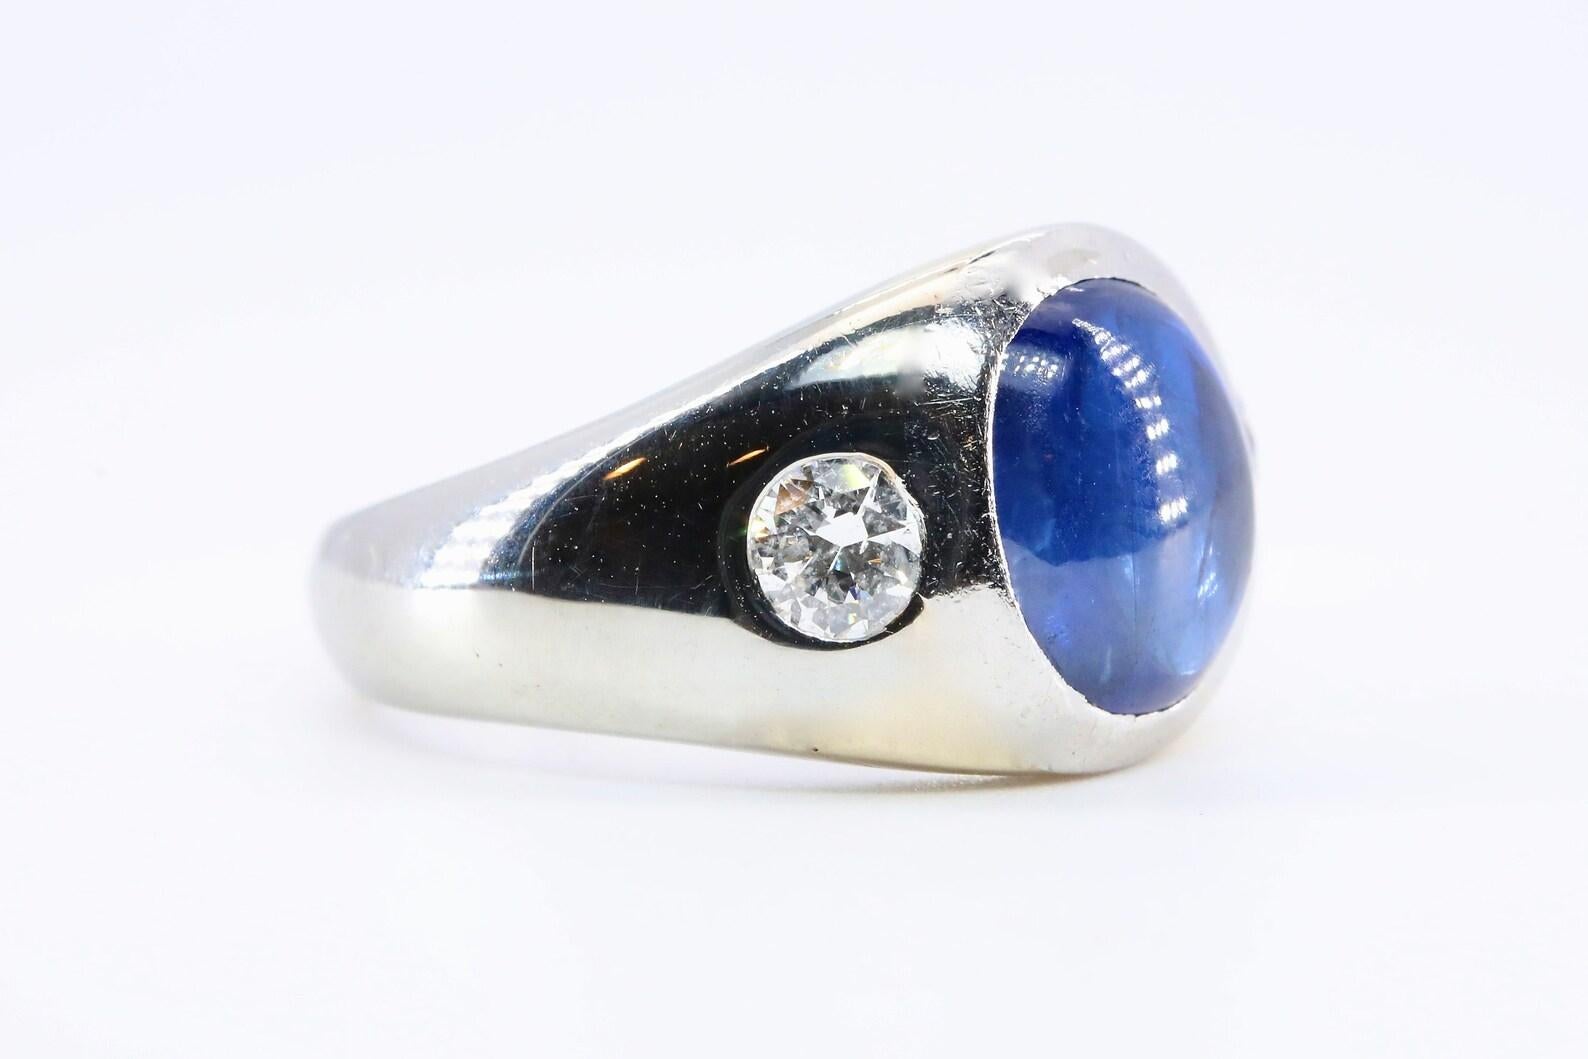 An Art Deco period Burma No Heat sapphire, and diamond ring set in platinum. Centering this ring is an impressive 5 carat No Heat sapphire of Burma origin. The sapphire comes with a GIA certificate, and has also received the rare and highly coveted